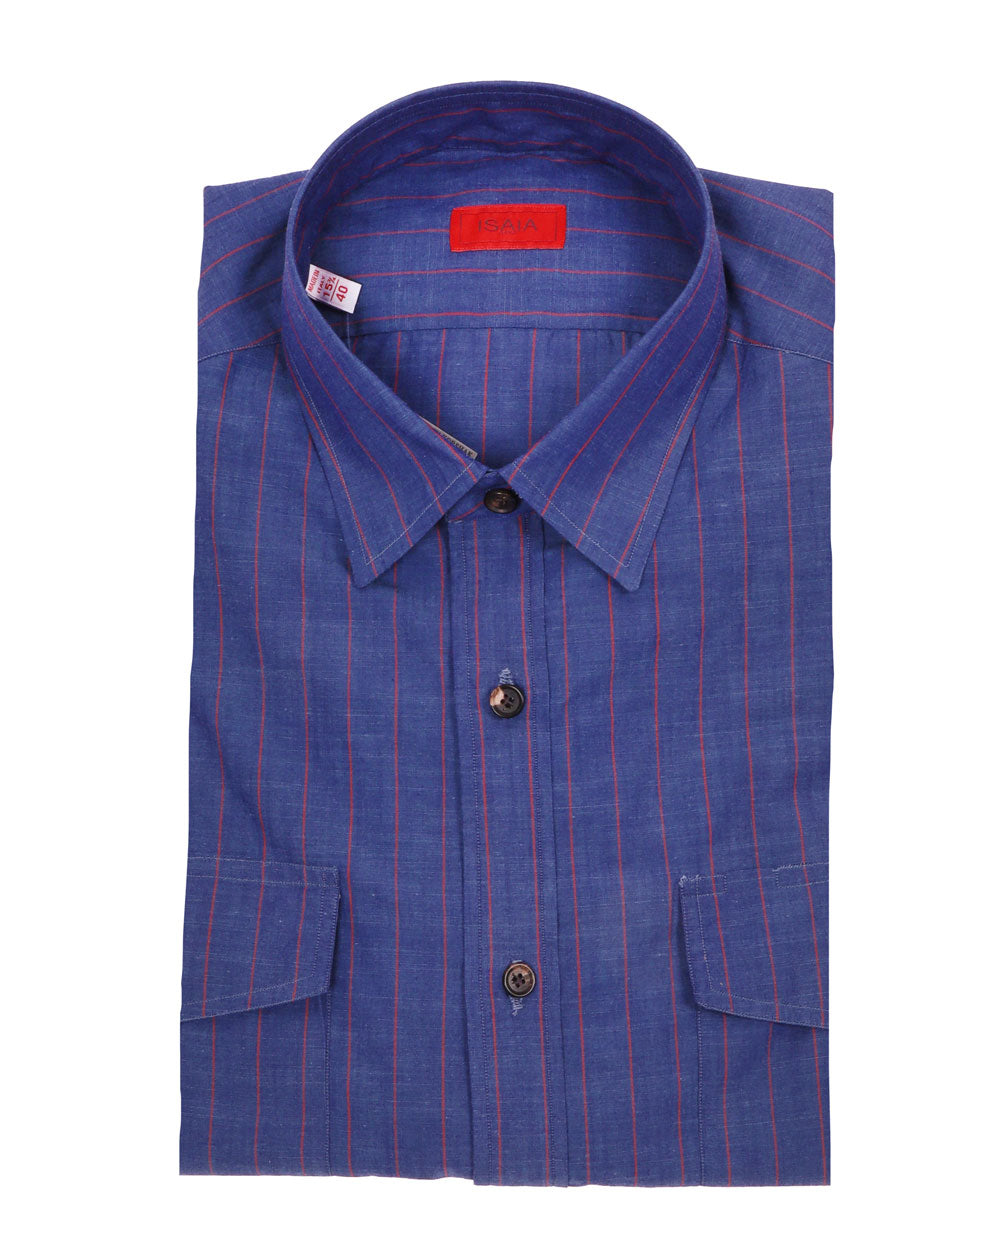 Navy Blue and Red Striped Dress Shirt